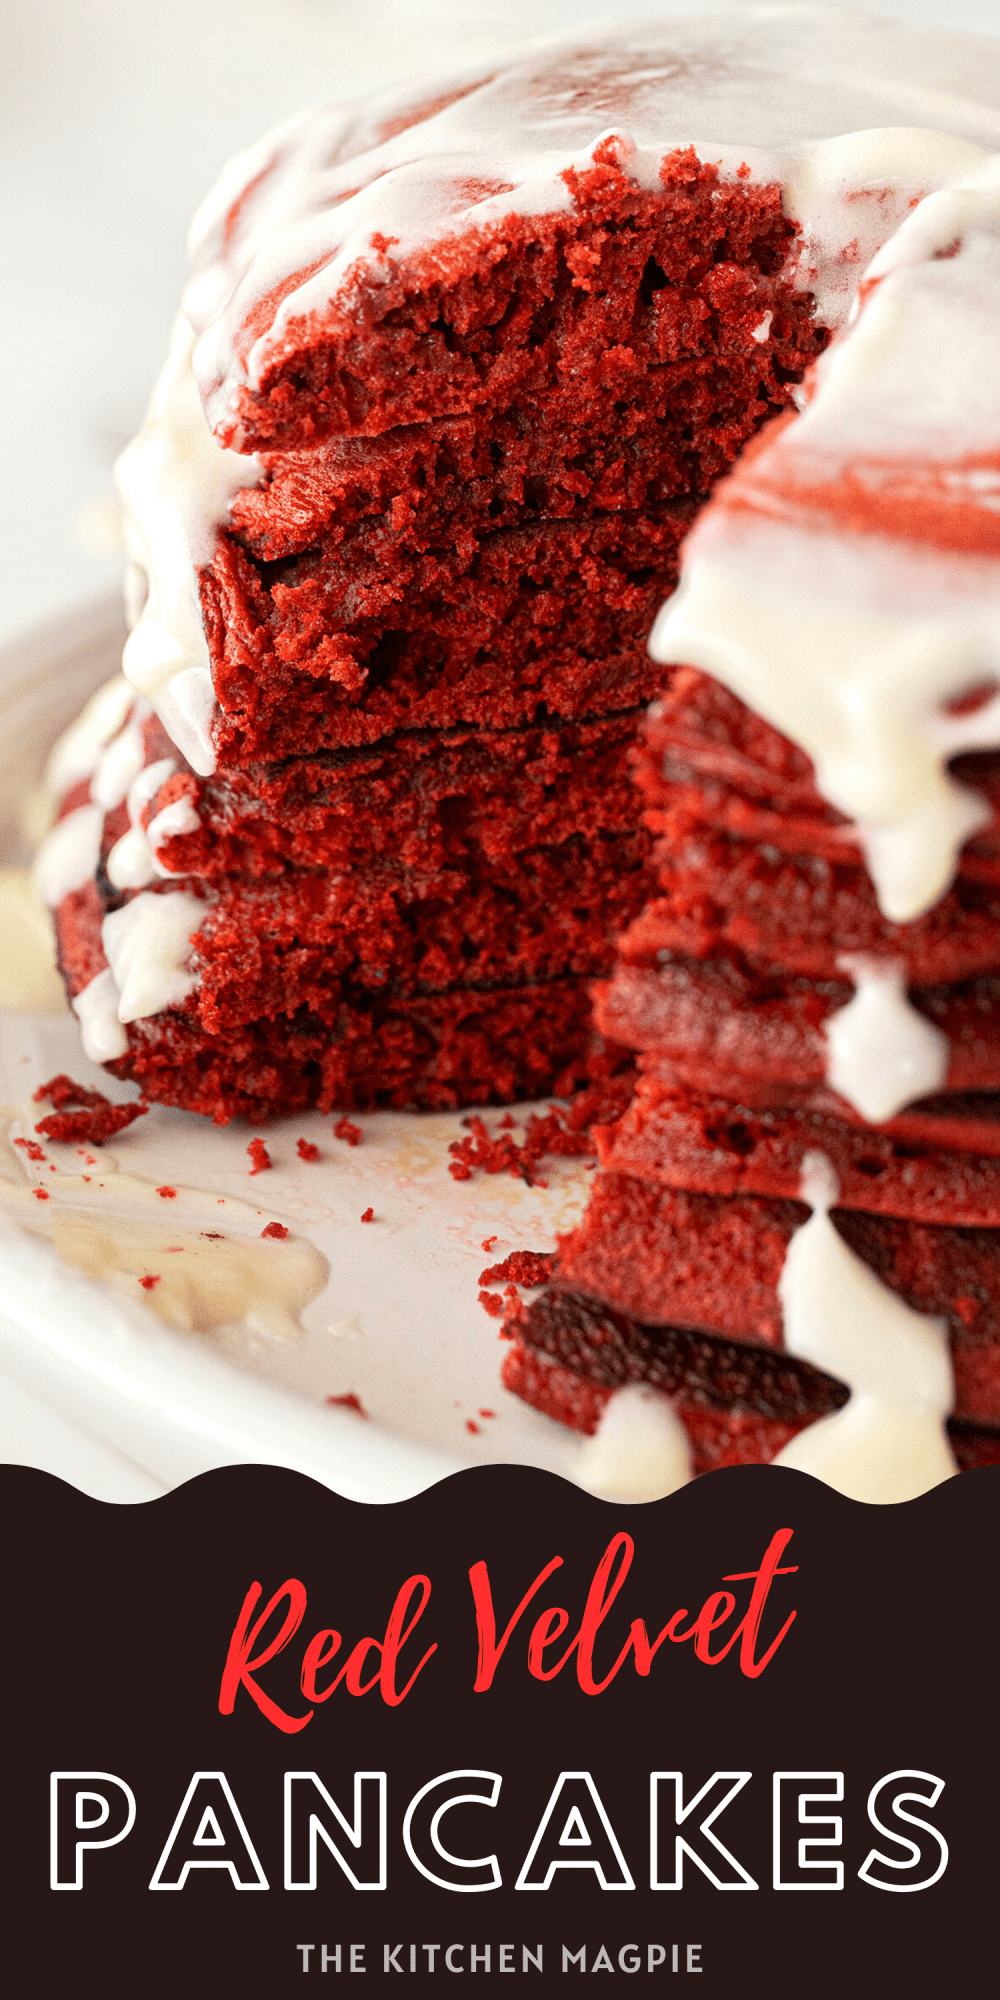 Red Velvet pancakes that are made from cake batter and will work with any cake mix you choose. Perfect for kids birthday parties or Monday mornings. #pancakes #redvelvet #creamcheese #breakfast 